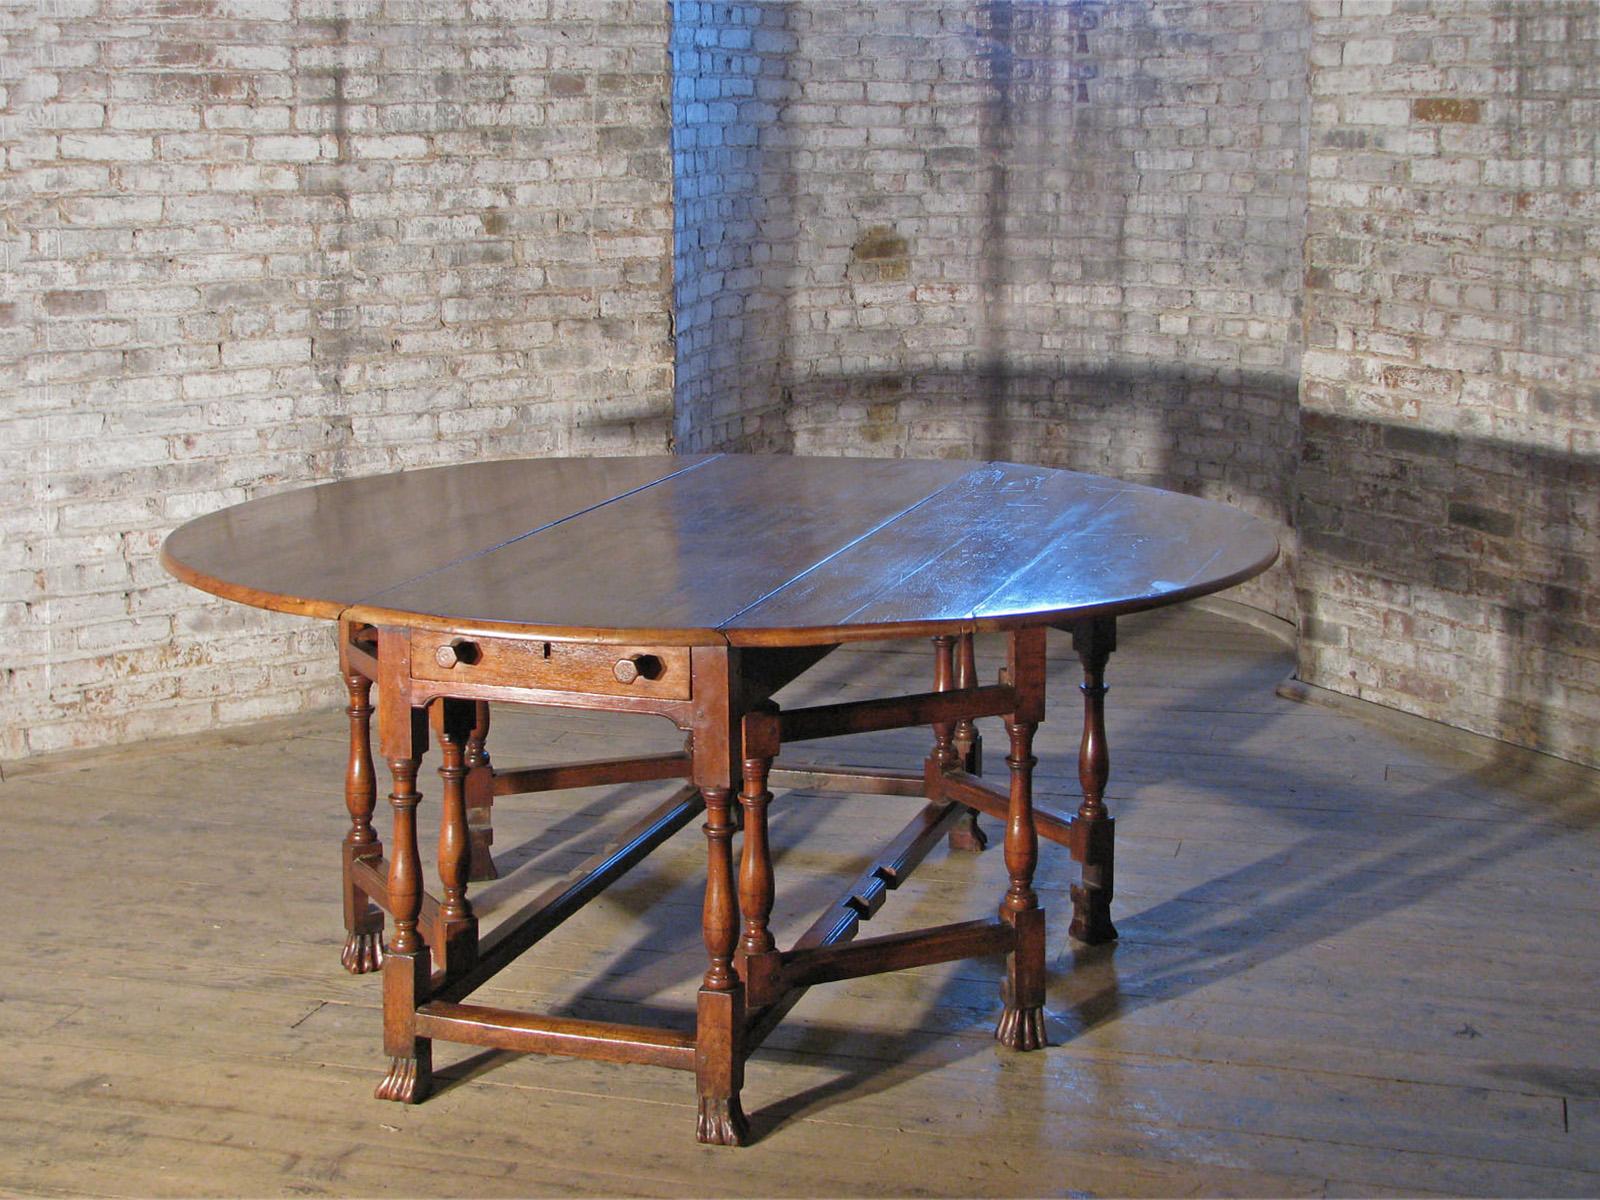 English William & Mary Period early 18th Century Walnut Double Gateleg Table, of refined design and beautiful warm color, made of walnut (not the usual oak) which gives it a more sophisticated look. The top consisting of three pieces, a narrow